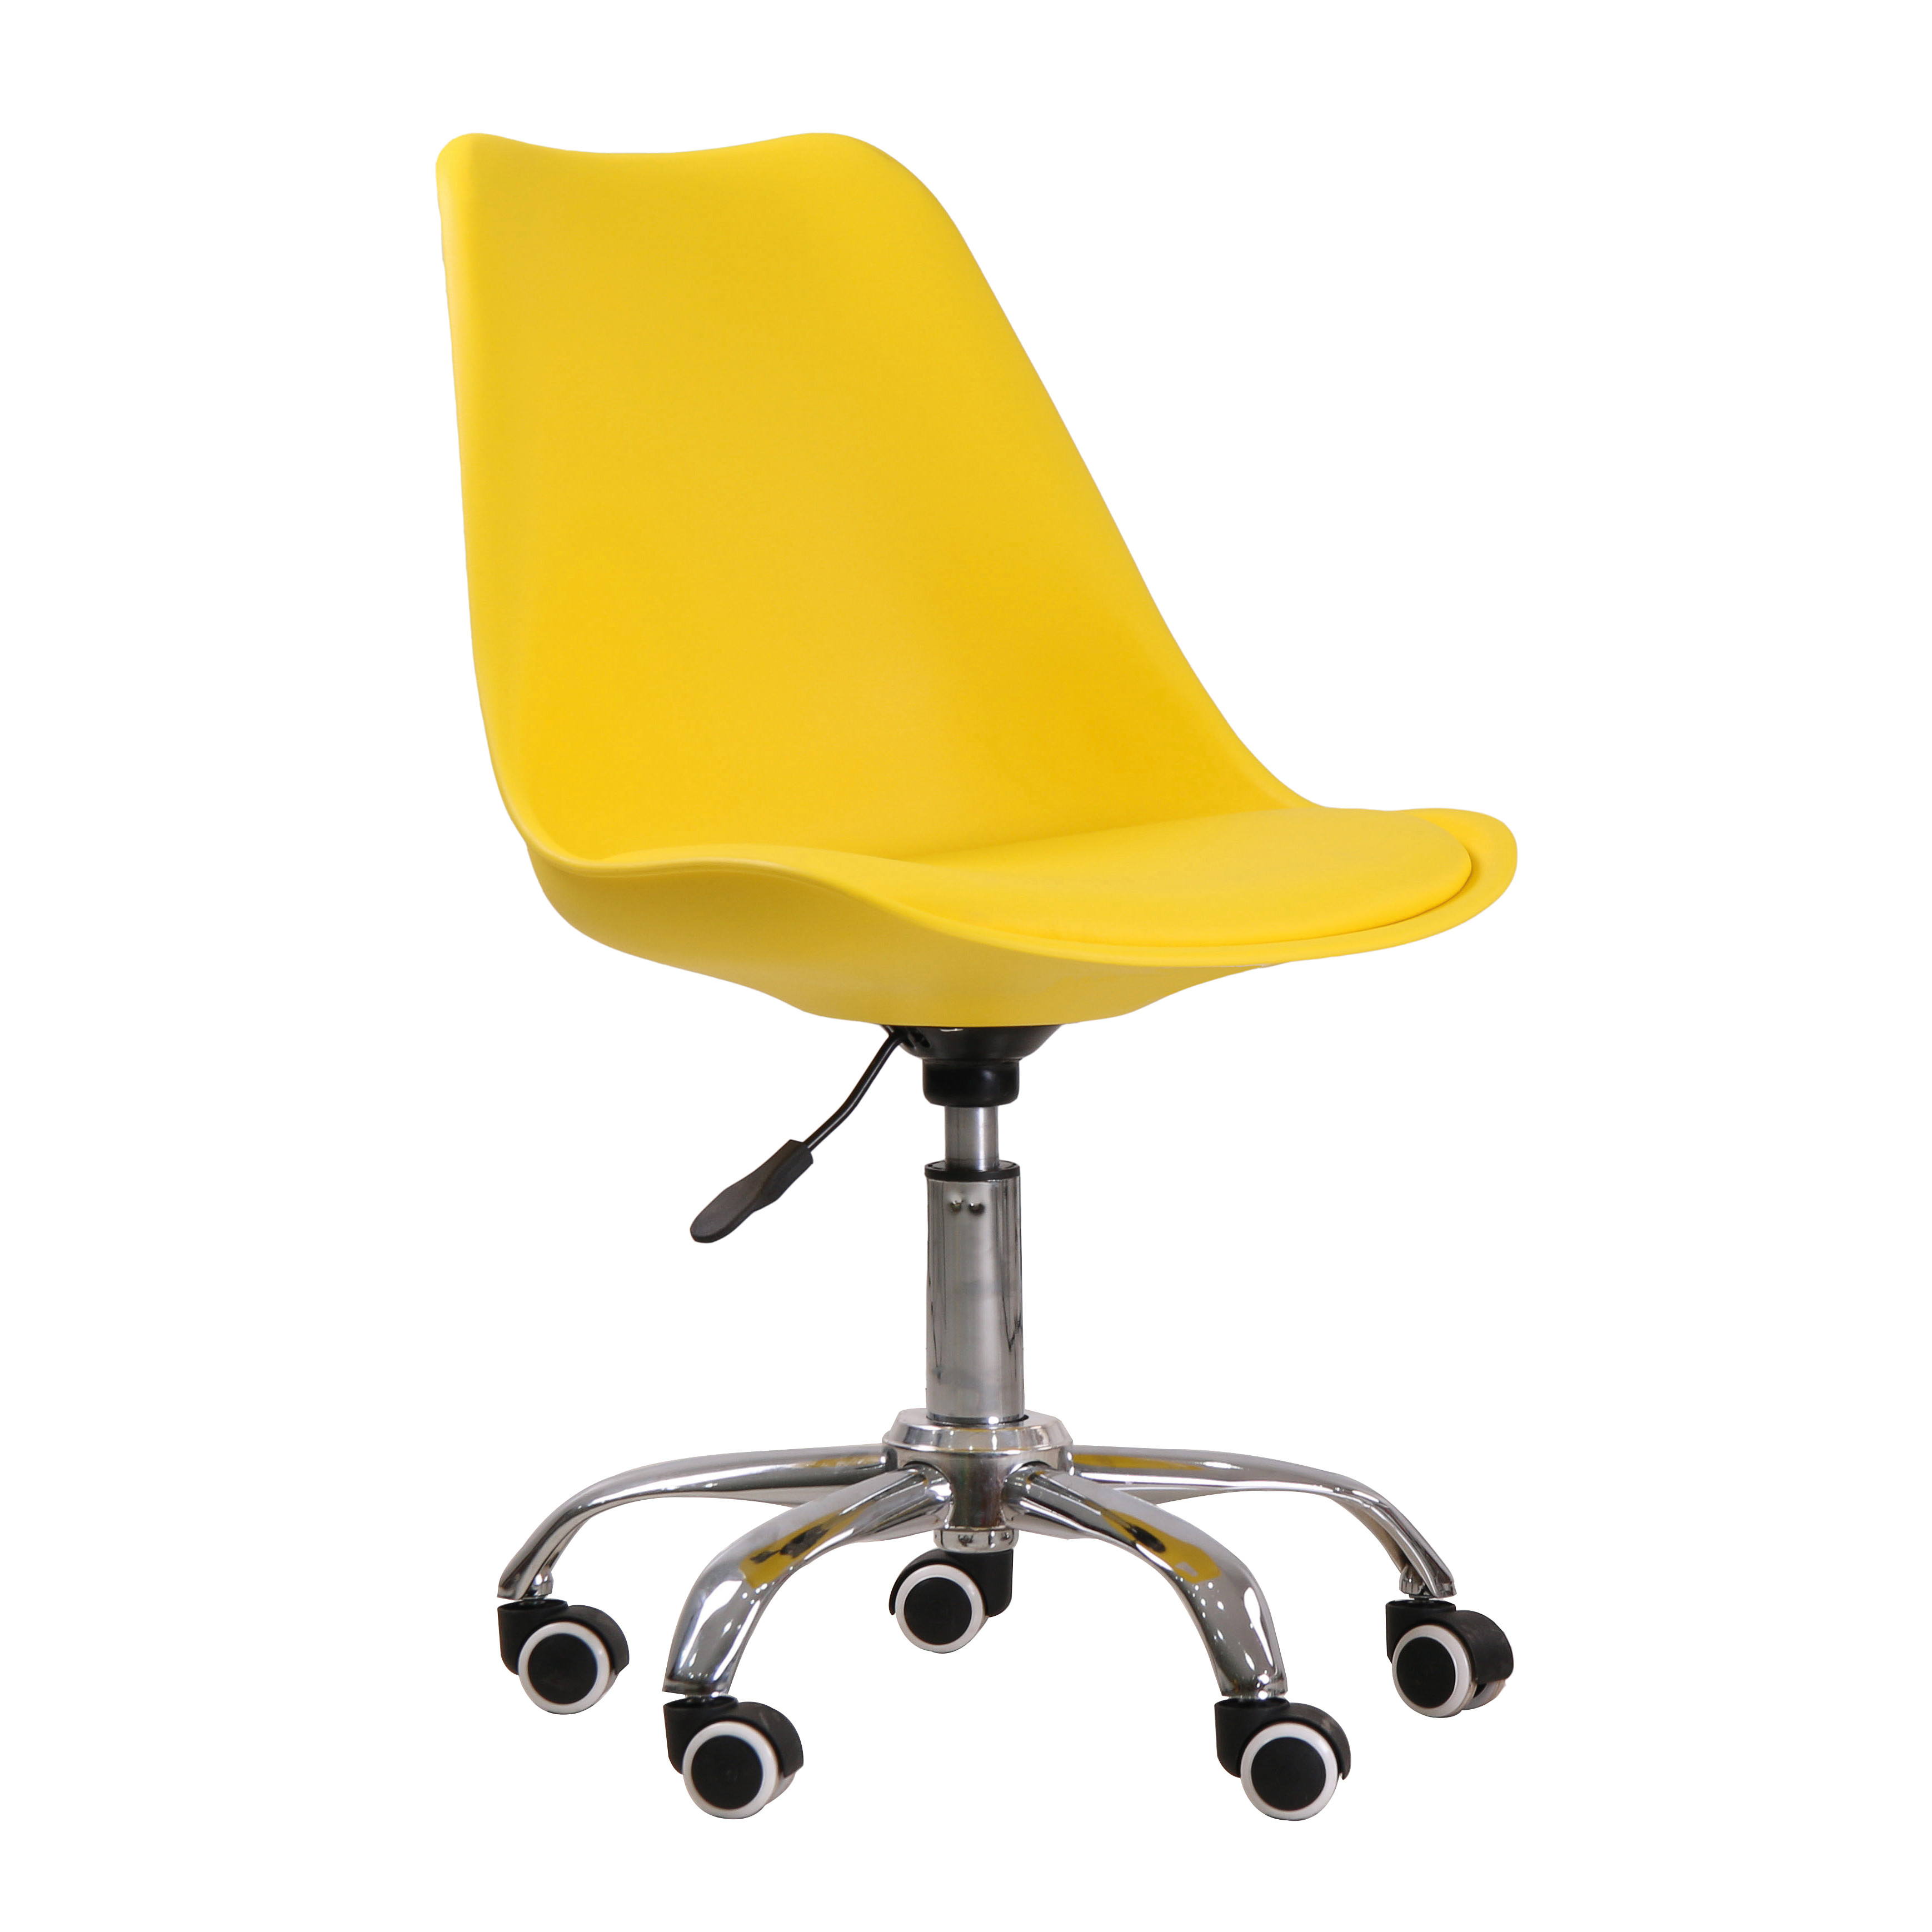 Orsen Swivel Office Chair Yellow Home Office Chairs